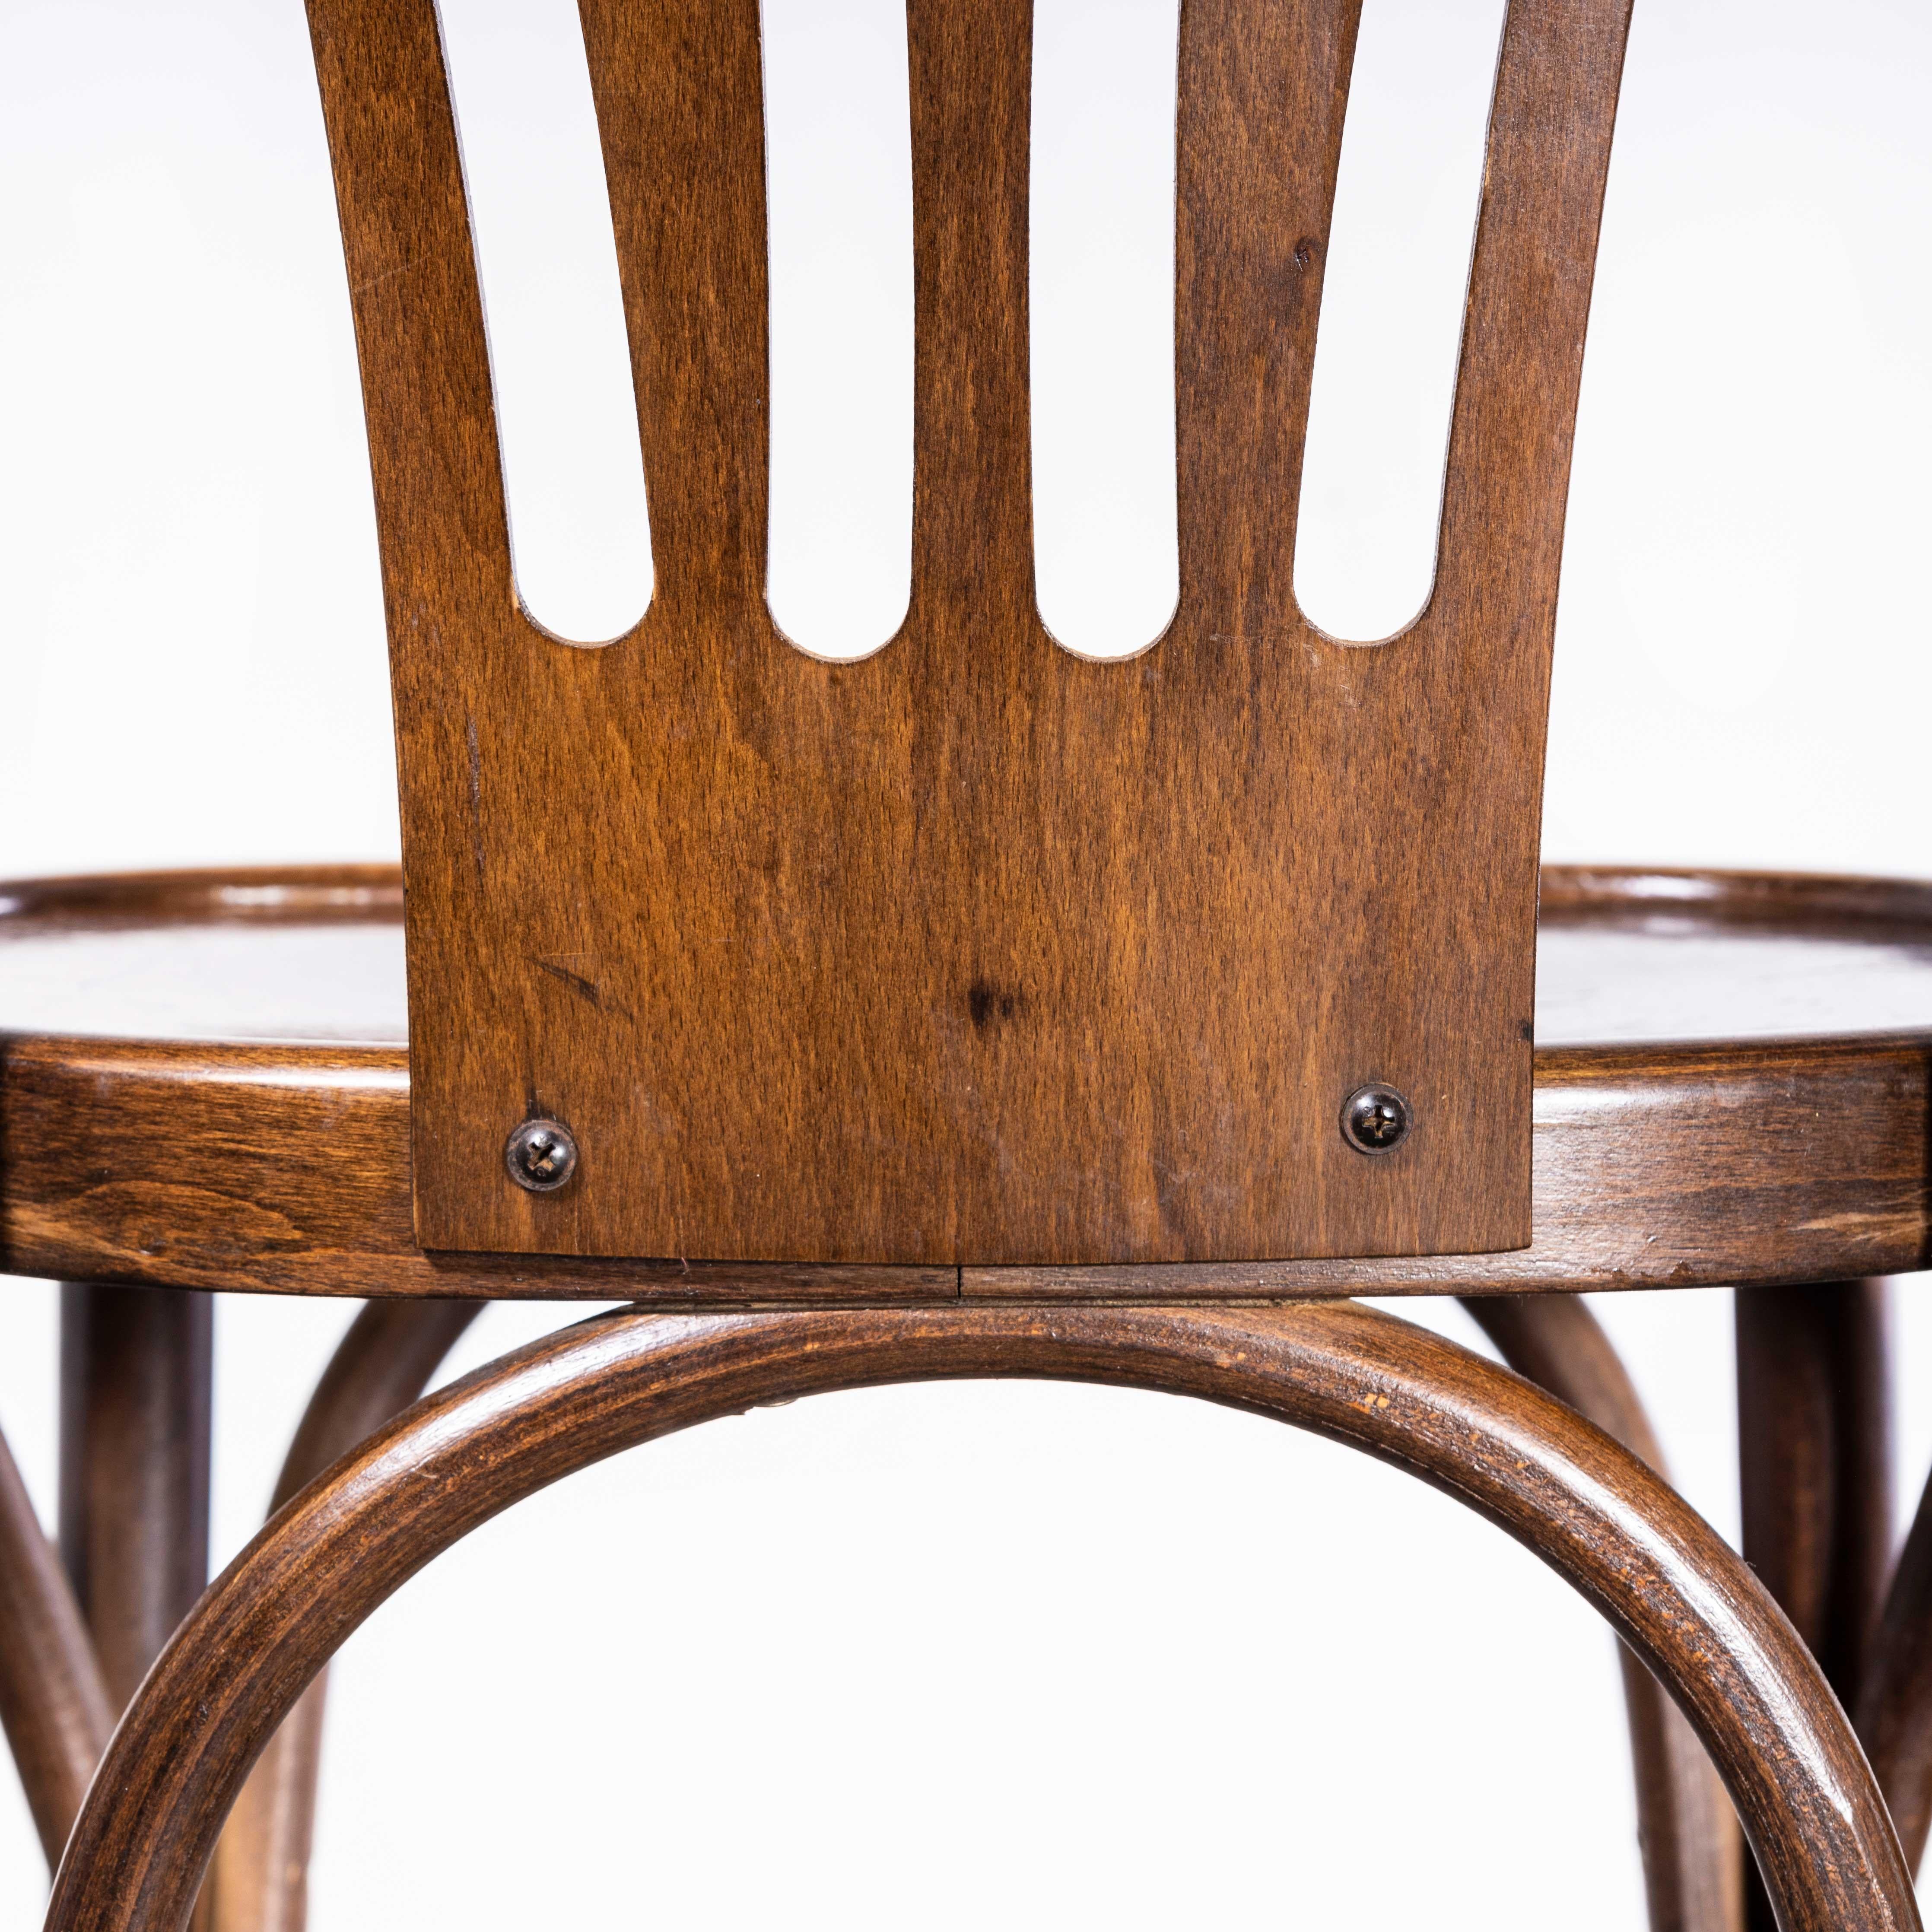 1970’s Classic High Back Bentwood Bar Chairs With Arms – Set Of Four
1970’s Classic High Back Bentwood Bar Chairs With Arms – Set Of Four. These high bar chairs were produced by the famous Czech firm Ton, a post war spin off from the famous Thonet